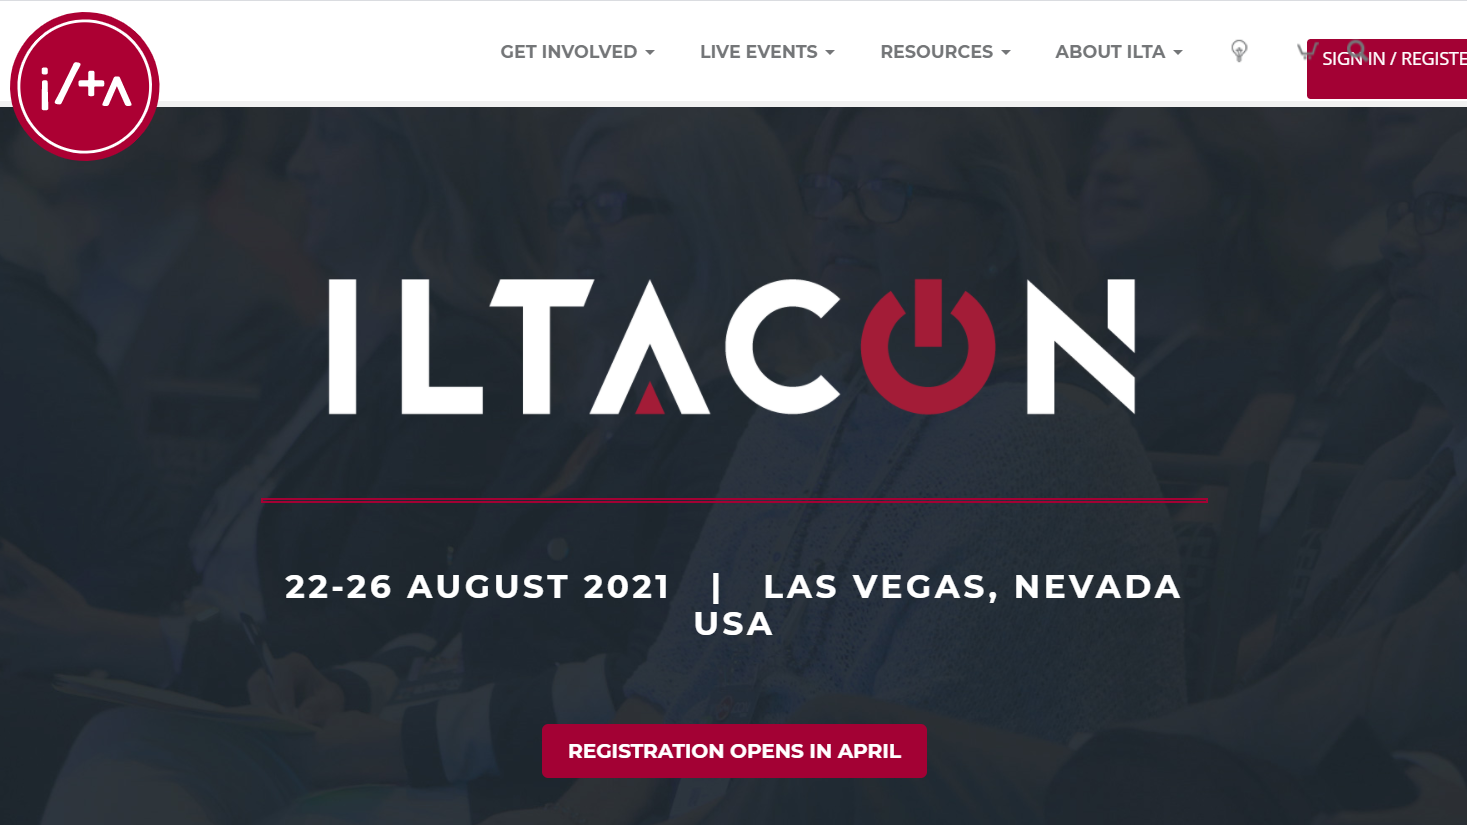 Another Major Vendor Appears to Have Pulled Its Employees from Attending ILTACON